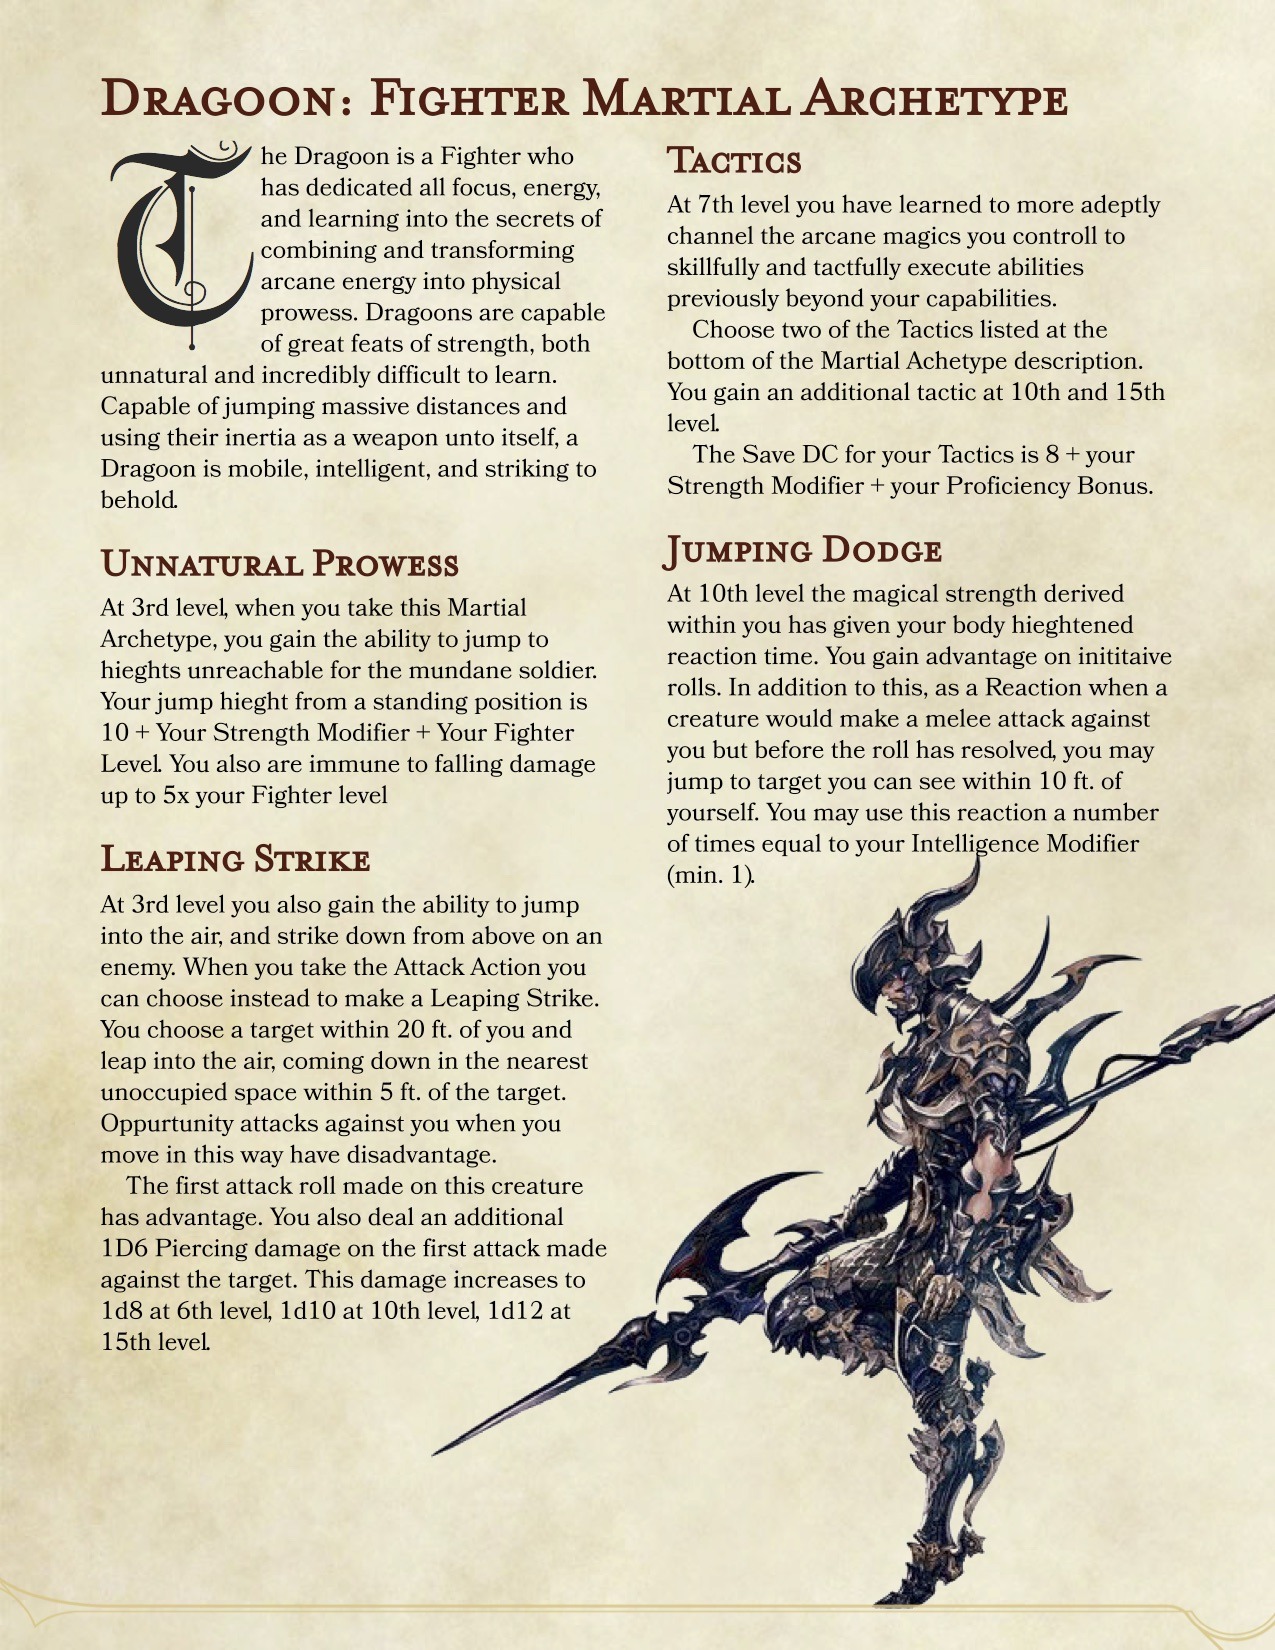 5E Fall Damage Resistance : The Harder They Fall Revising Falling Damage For 5e / Damage ...